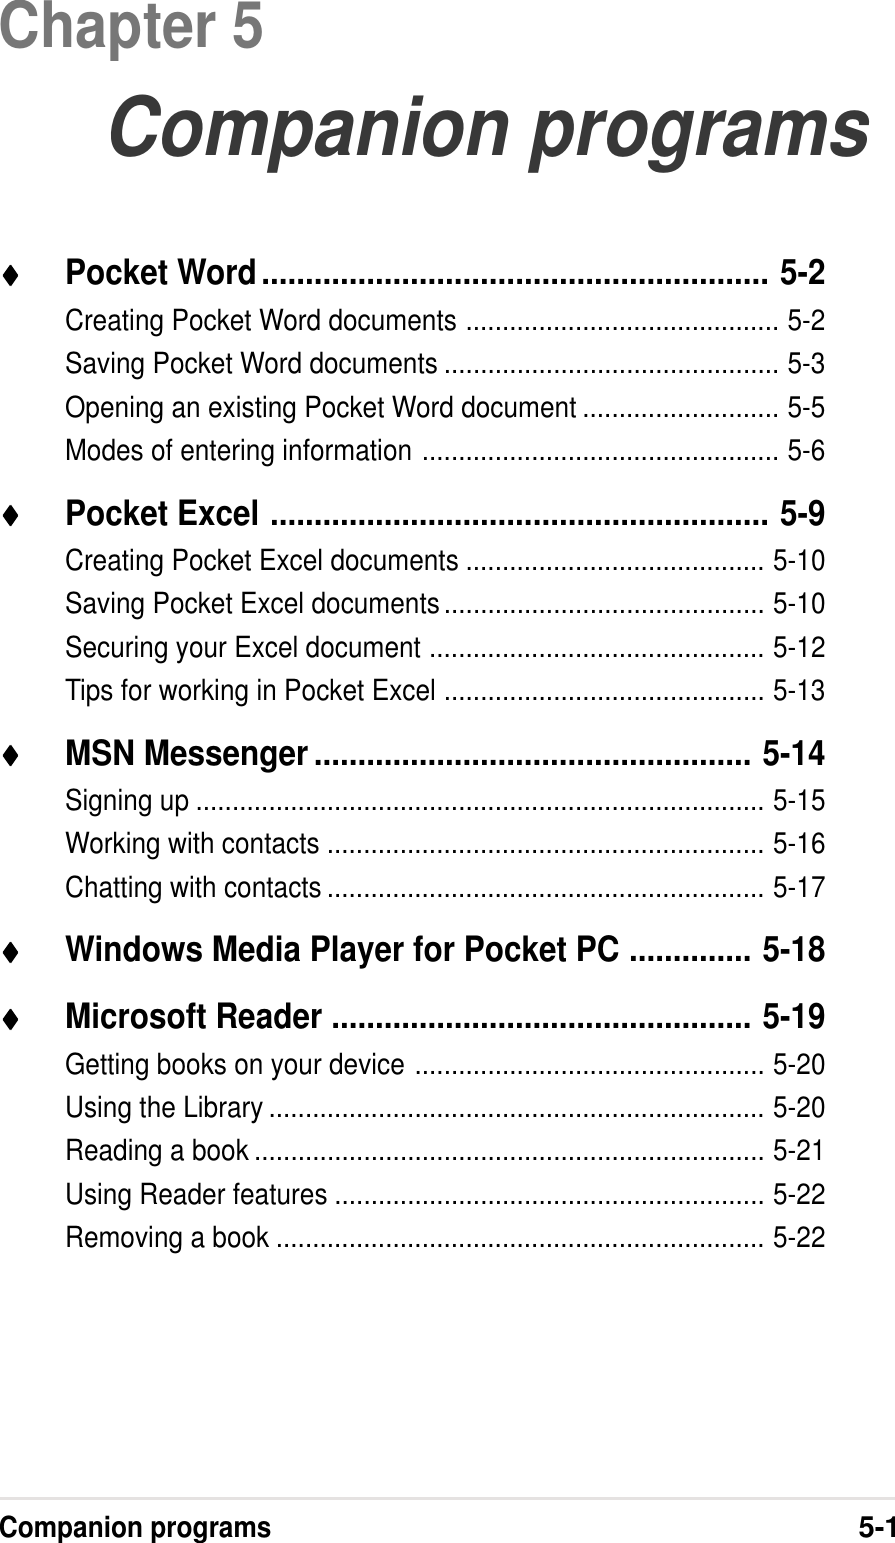 Companion programs5-1Chapter 5Companion programs♦♦♦♦♦Pocket Word.......................................................... 5-2Creating Pocket Word documents ........................................... 5-2Saving Pocket Word documents .............................................. 5-3Opening an existing Pocket Word document ........................... 5-5Modes of entering information ................................................. 5-6♦♦♦♦♦Pocket Excel ......................................................... 5-9Creating Pocket Excel documents ......................................... 5-10Saving Pocket Excel documents............................................ 5-10Securing your Excel document .............................................. 5-12Tips for working in Pocket Excel ............................................ 5-13♦♦♦♦♦MSN Messenger .................................................. 5-14Signing up .............................................................................. 5-15Working with contacts ............................................................ 5-16Chatting with contacts ............................................................ 5-17♦♦♦♦♦Windows Media Player for Pocket PC .............. 5-18♦♦♦♦♦Microsoft Reader ................................................ 5-19Getting books on your device ................................................ 5-20Using the Library .................................................................... 5-20Reading a book ...................................................................... 5-21Using Reader features ........................................................... 5-22Removing a book ................................................................... 5-22